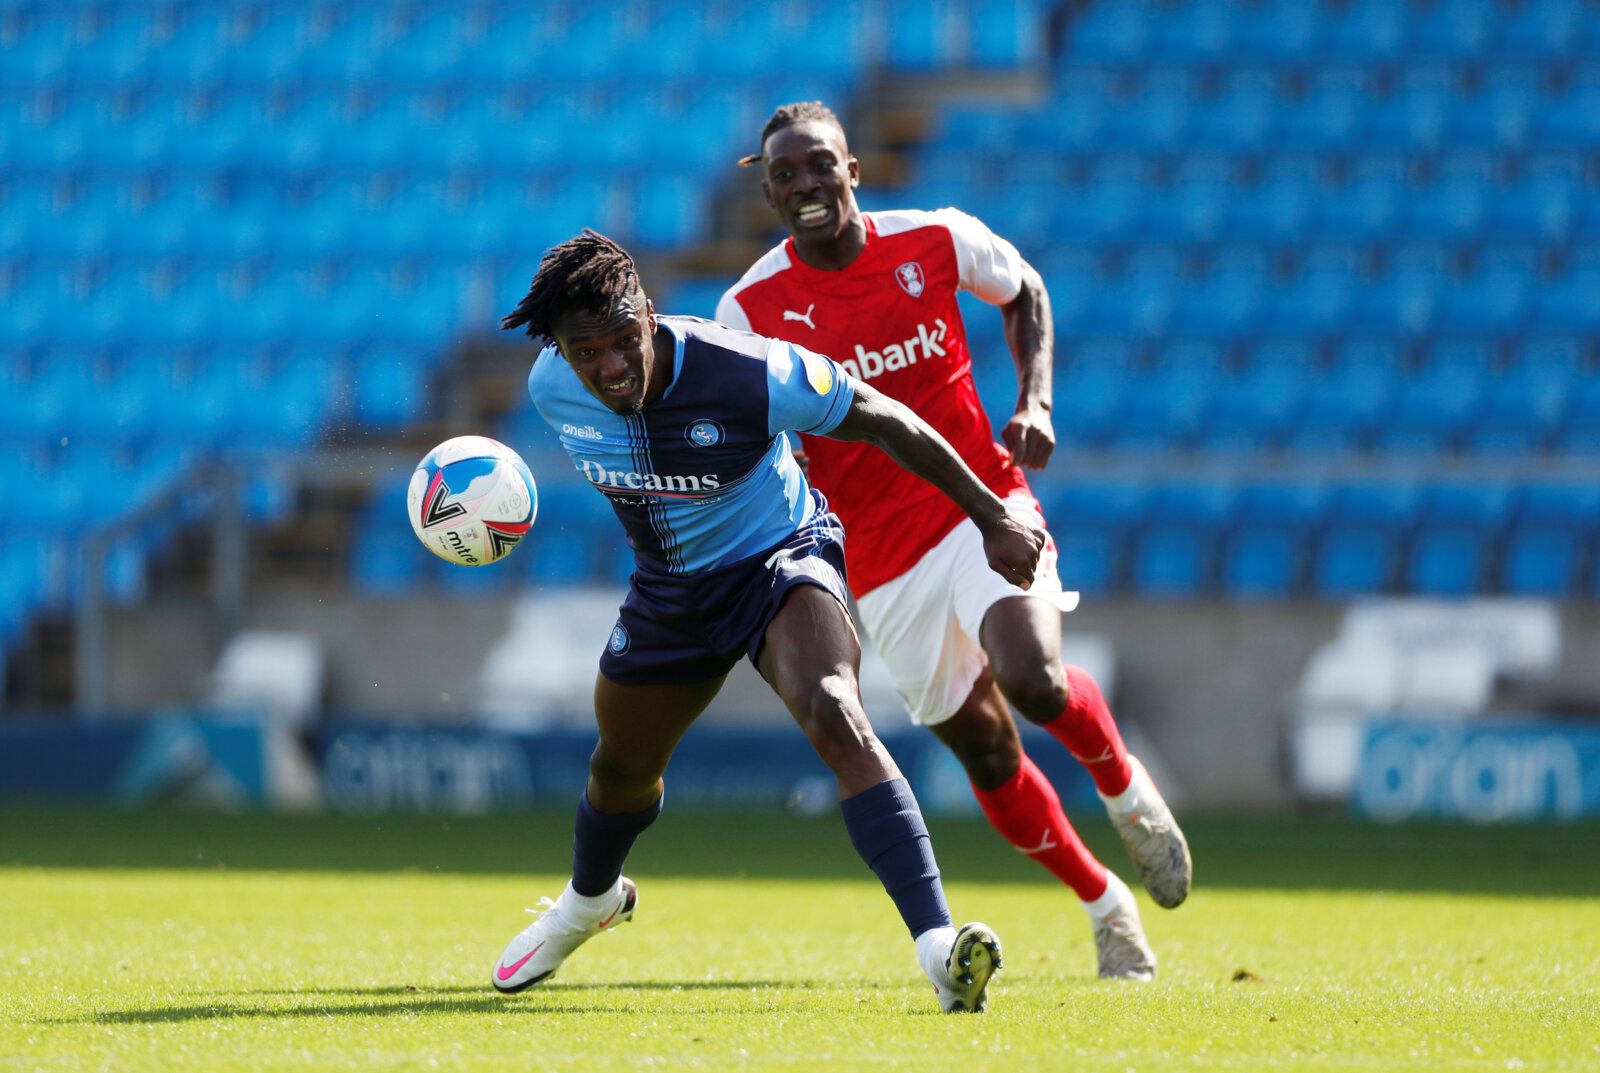 Soccer Football - Championship - Wycombe Wanderers v Rotherham United - Adams Park, High Wycombe, Britain - September 12, 2020  Wycombe WanderersÕ Anthony Stewart in action with Rotherham UnitedÕs Freddie Ladapo  Action Images/Matthew Childs  EDITORIAL USE ONLY. No use with unauthorized audio, video, data, fixture lists, club/league logos or 